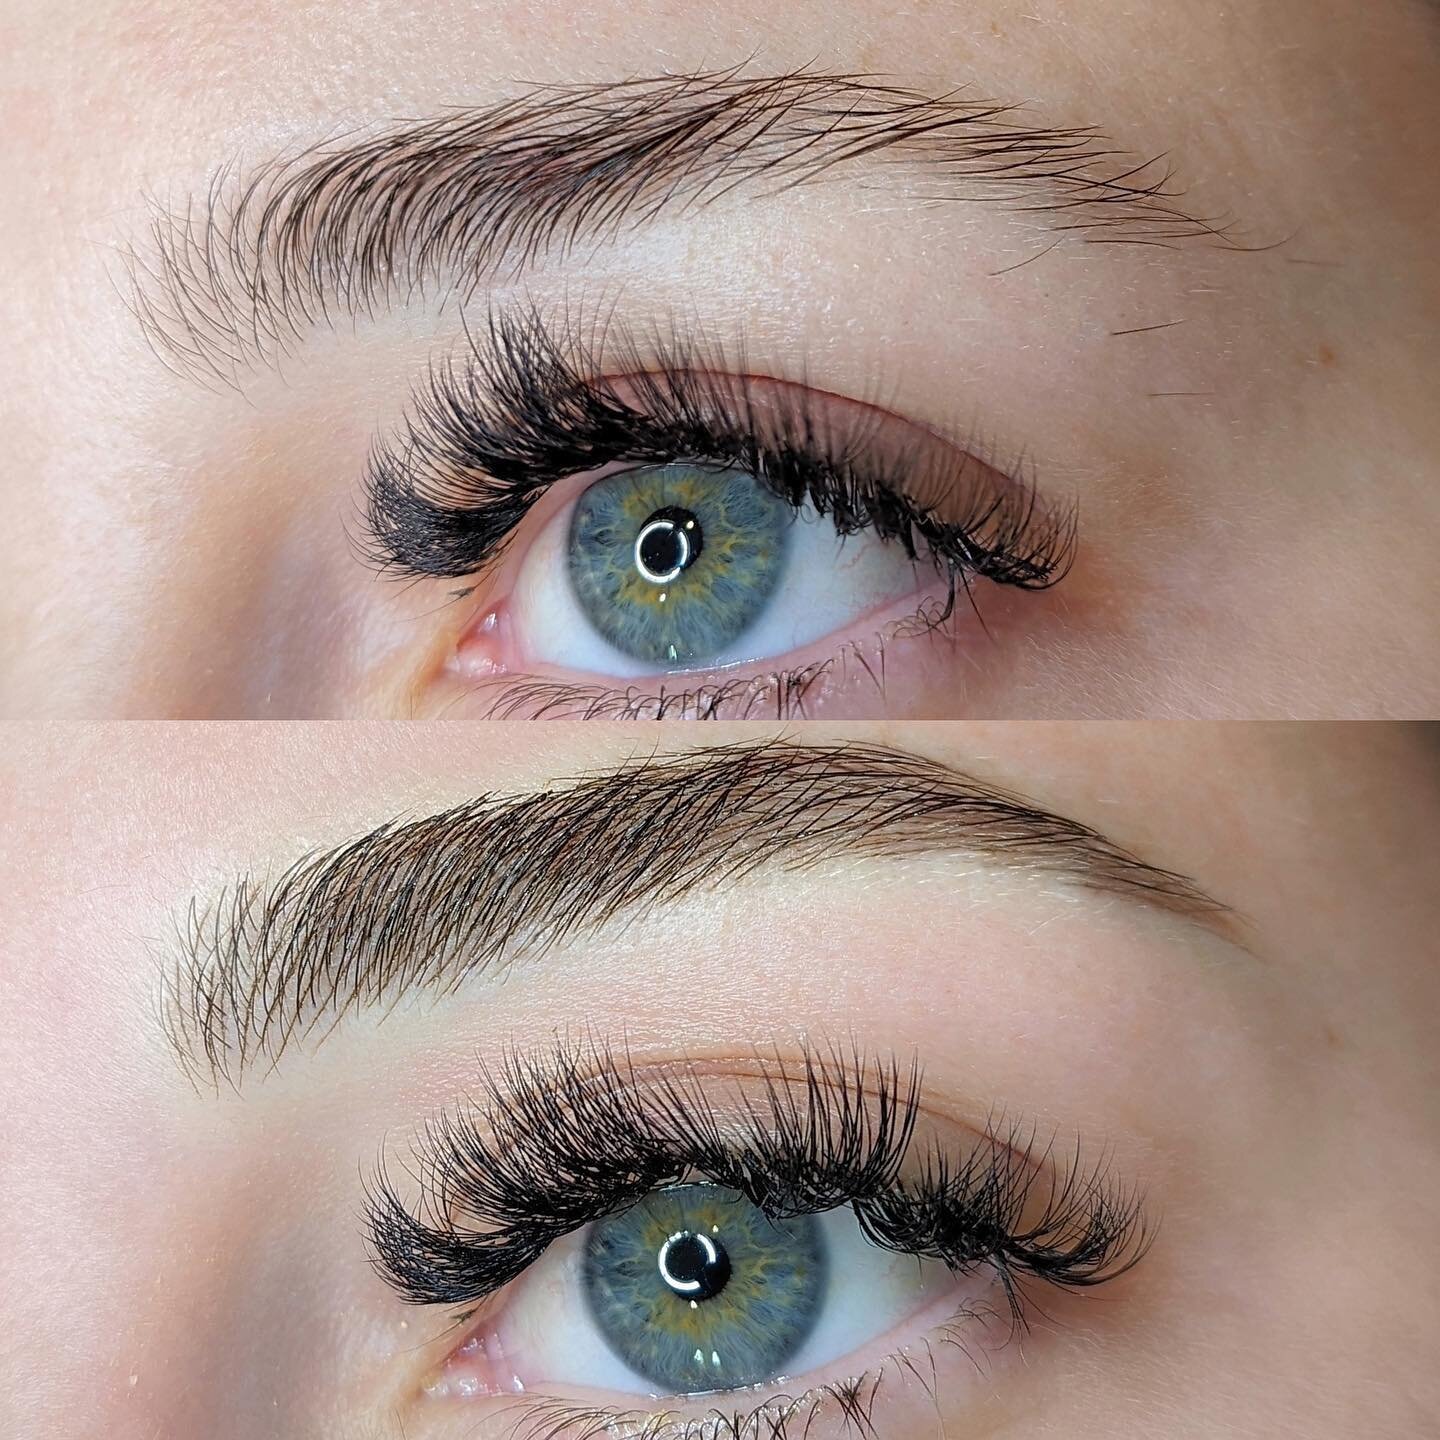 Fine feather strokes immediately after treatment ✨

What do you think of this subtle transformation? 
.
.
. 
.
.
#microblading #microbladingeyebrows #browgoals #microbladingartist #browsonfleek #eyebrowtattoo #sydneybrowspecialist #feathertattoo #pho